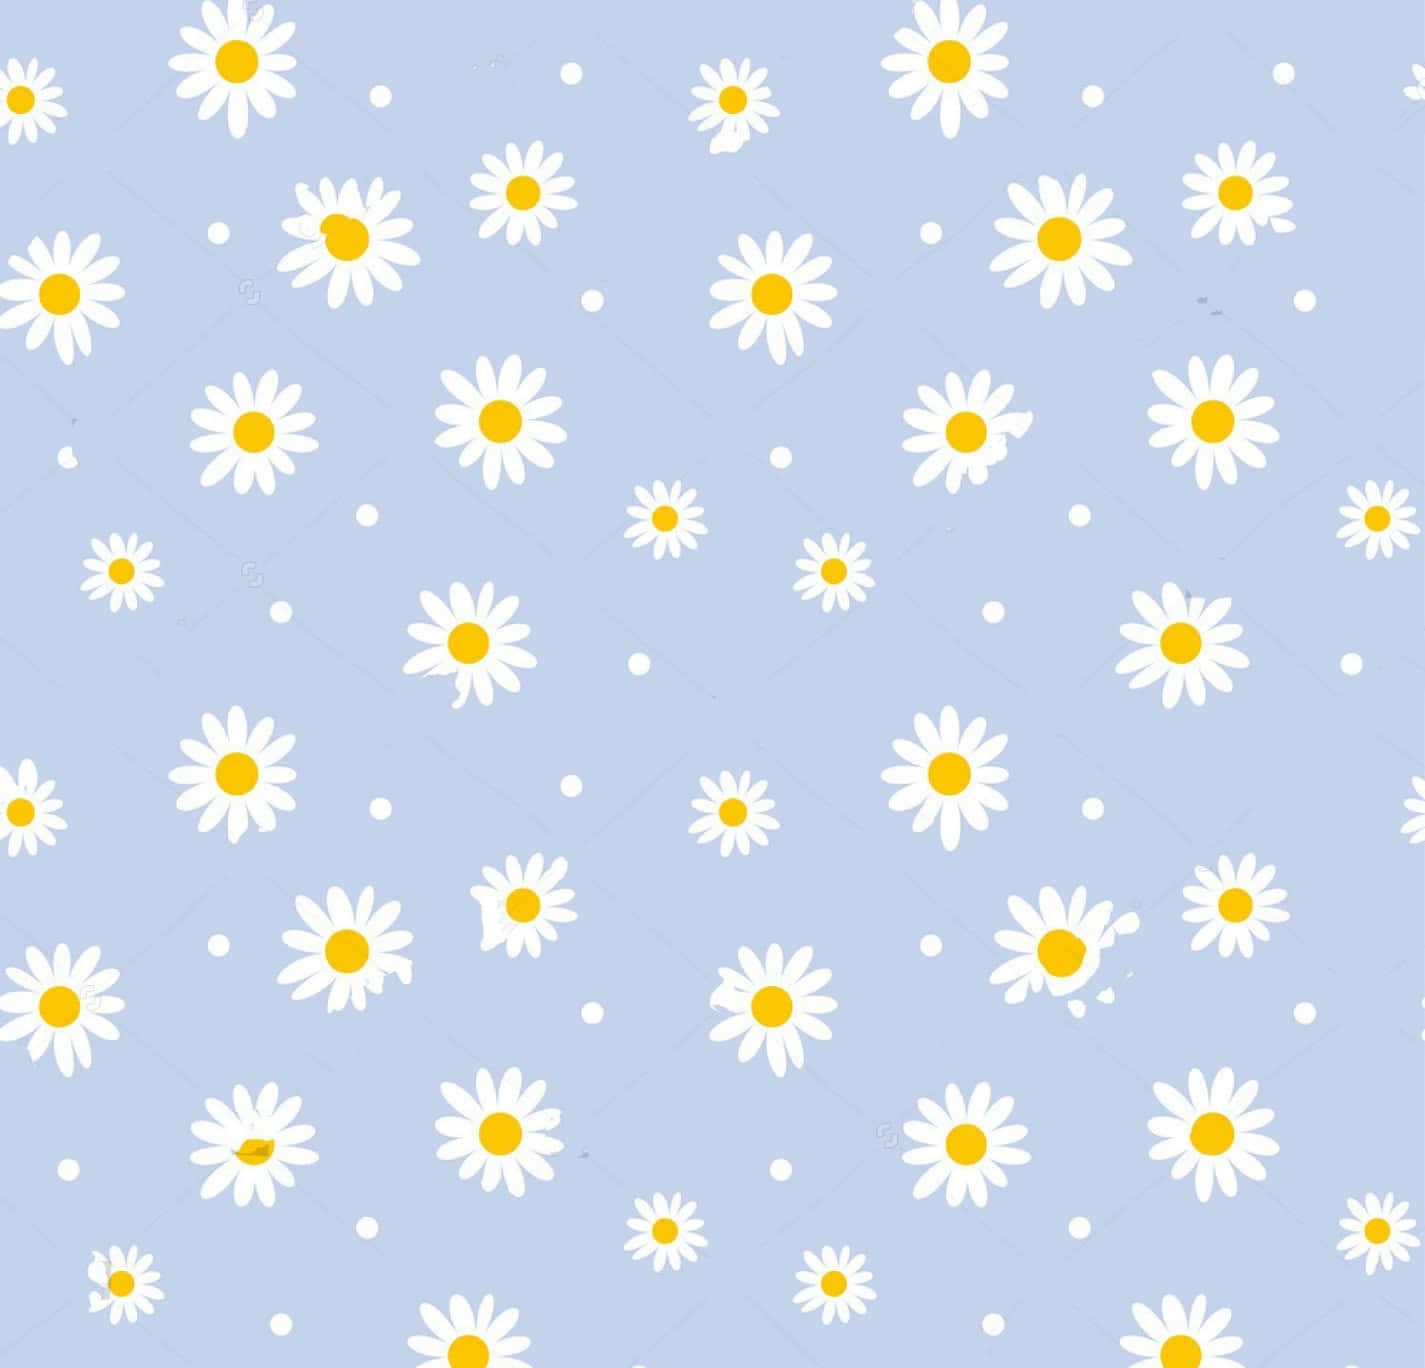 Brighten your days with a gorgeous floral background